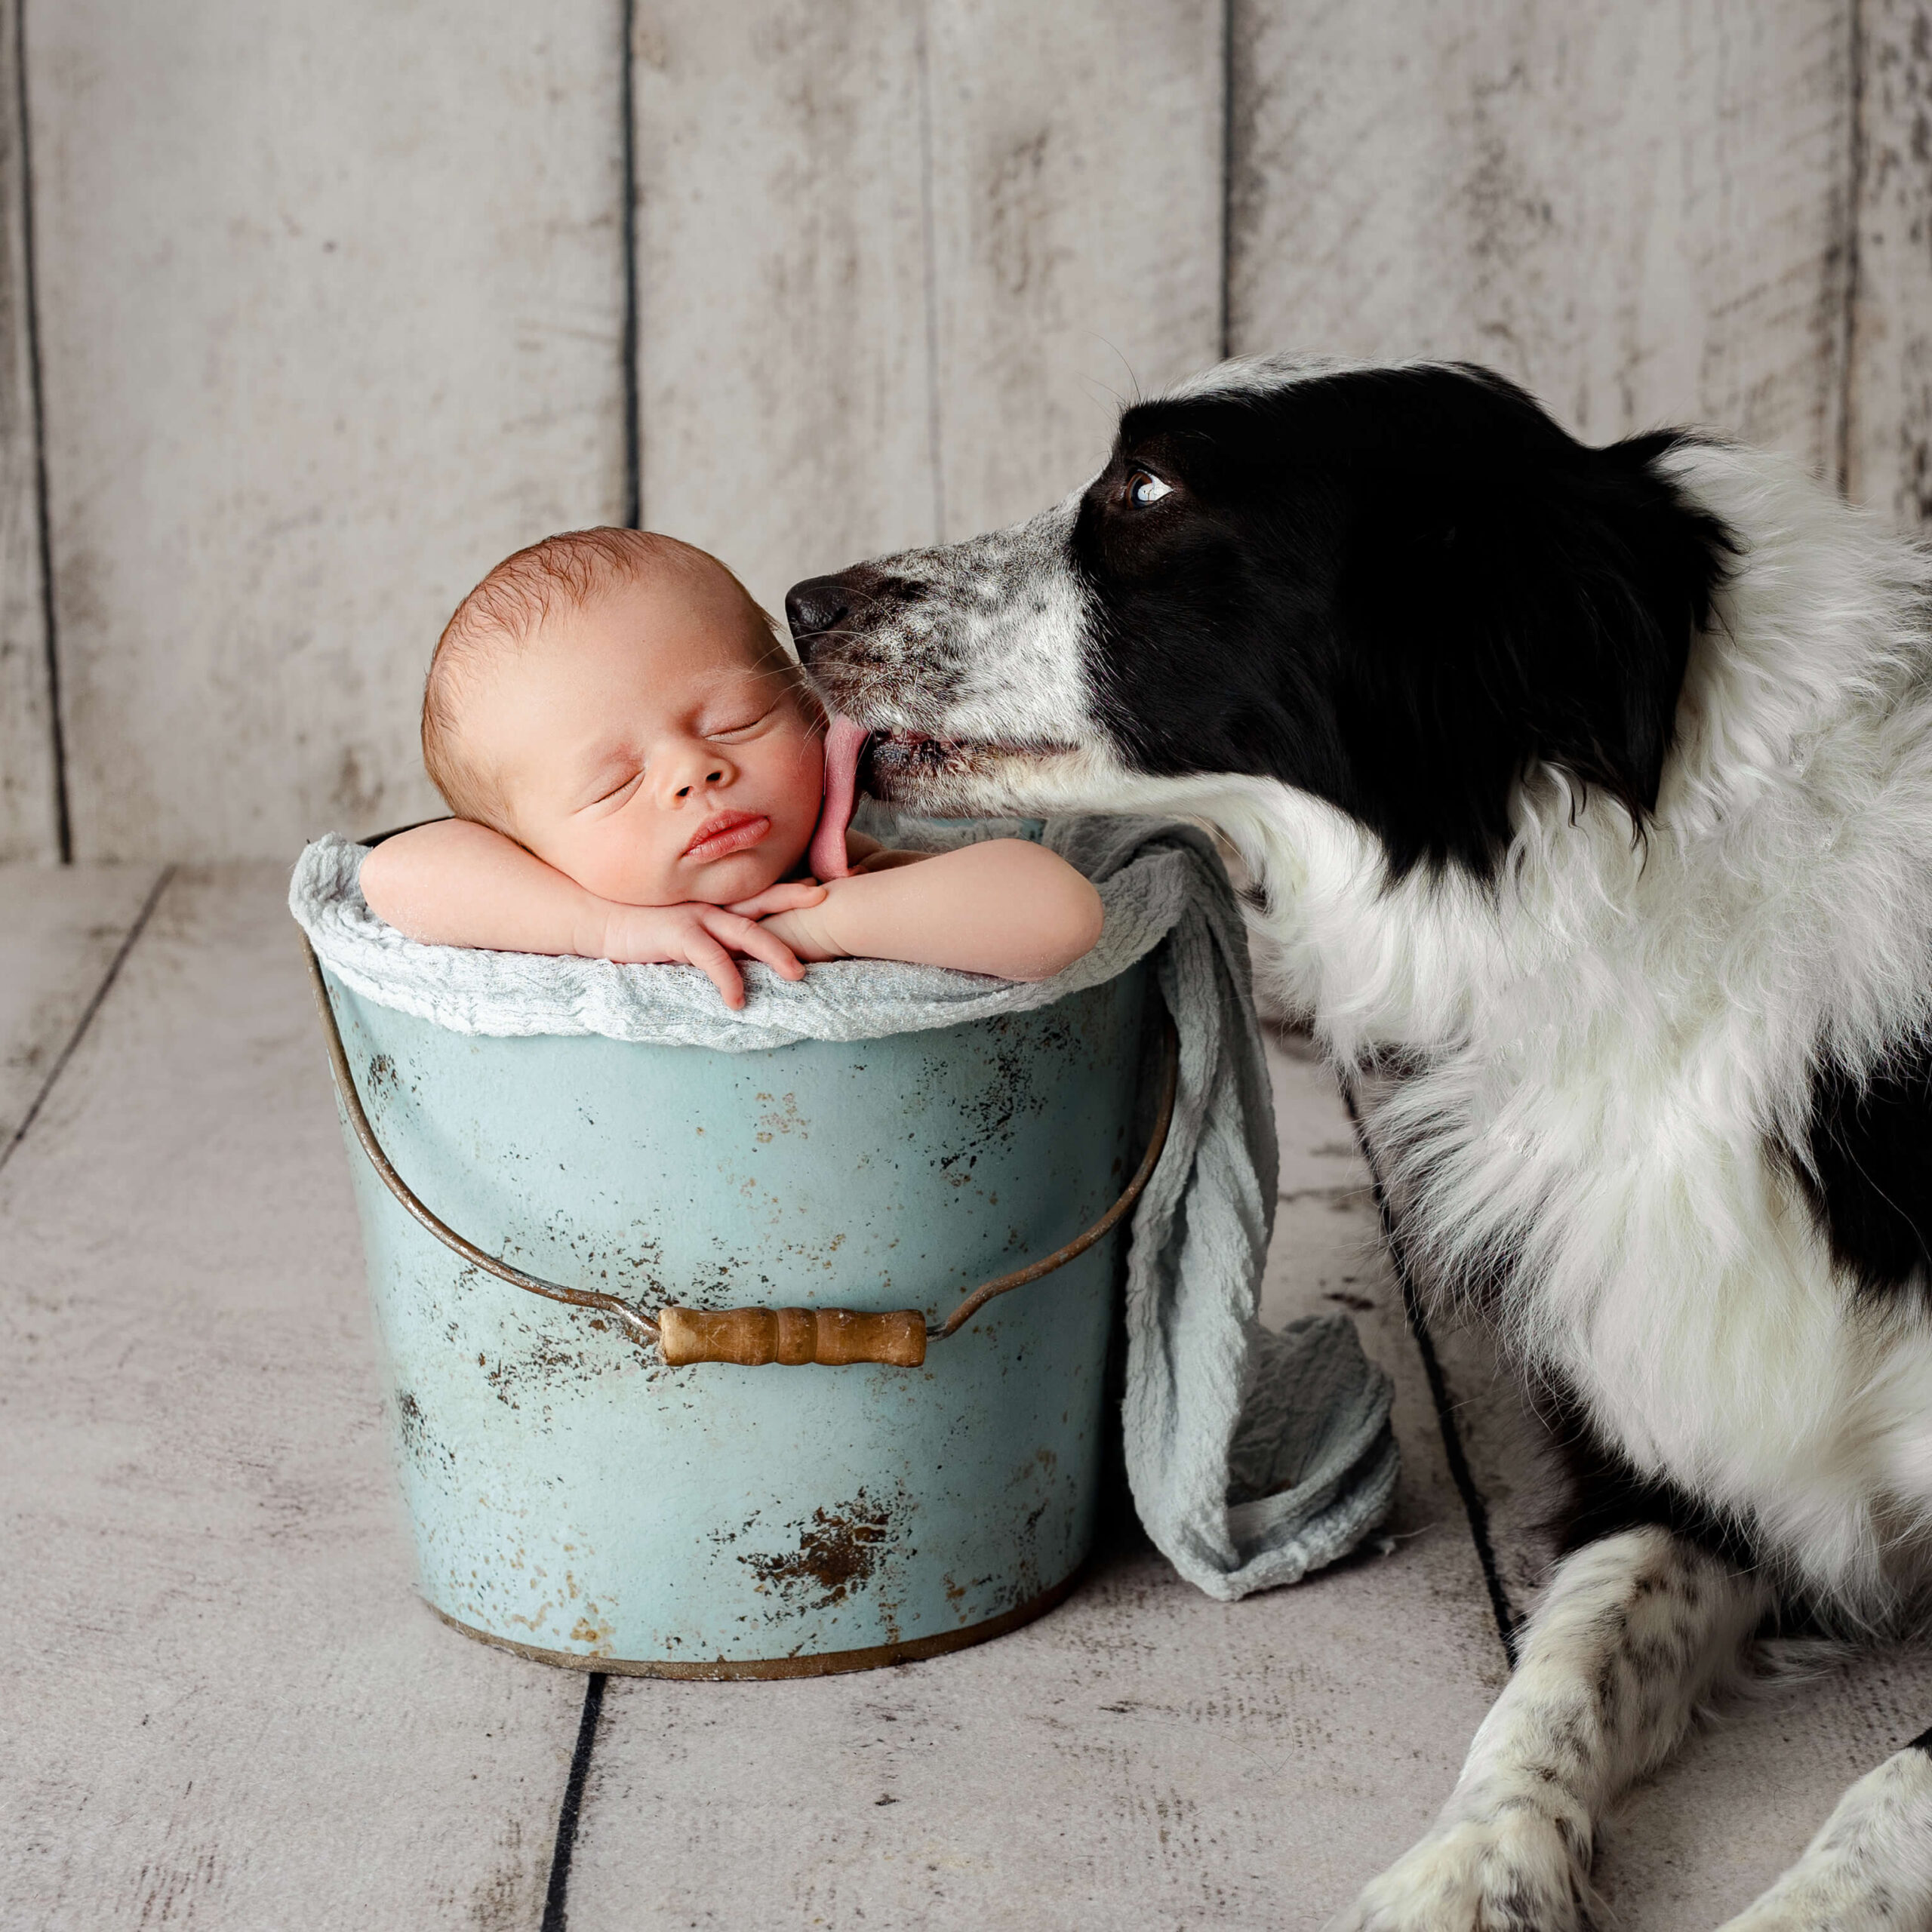 newbon baby boy in a bucket with his pet dog licking his face at a newborn photo shoot